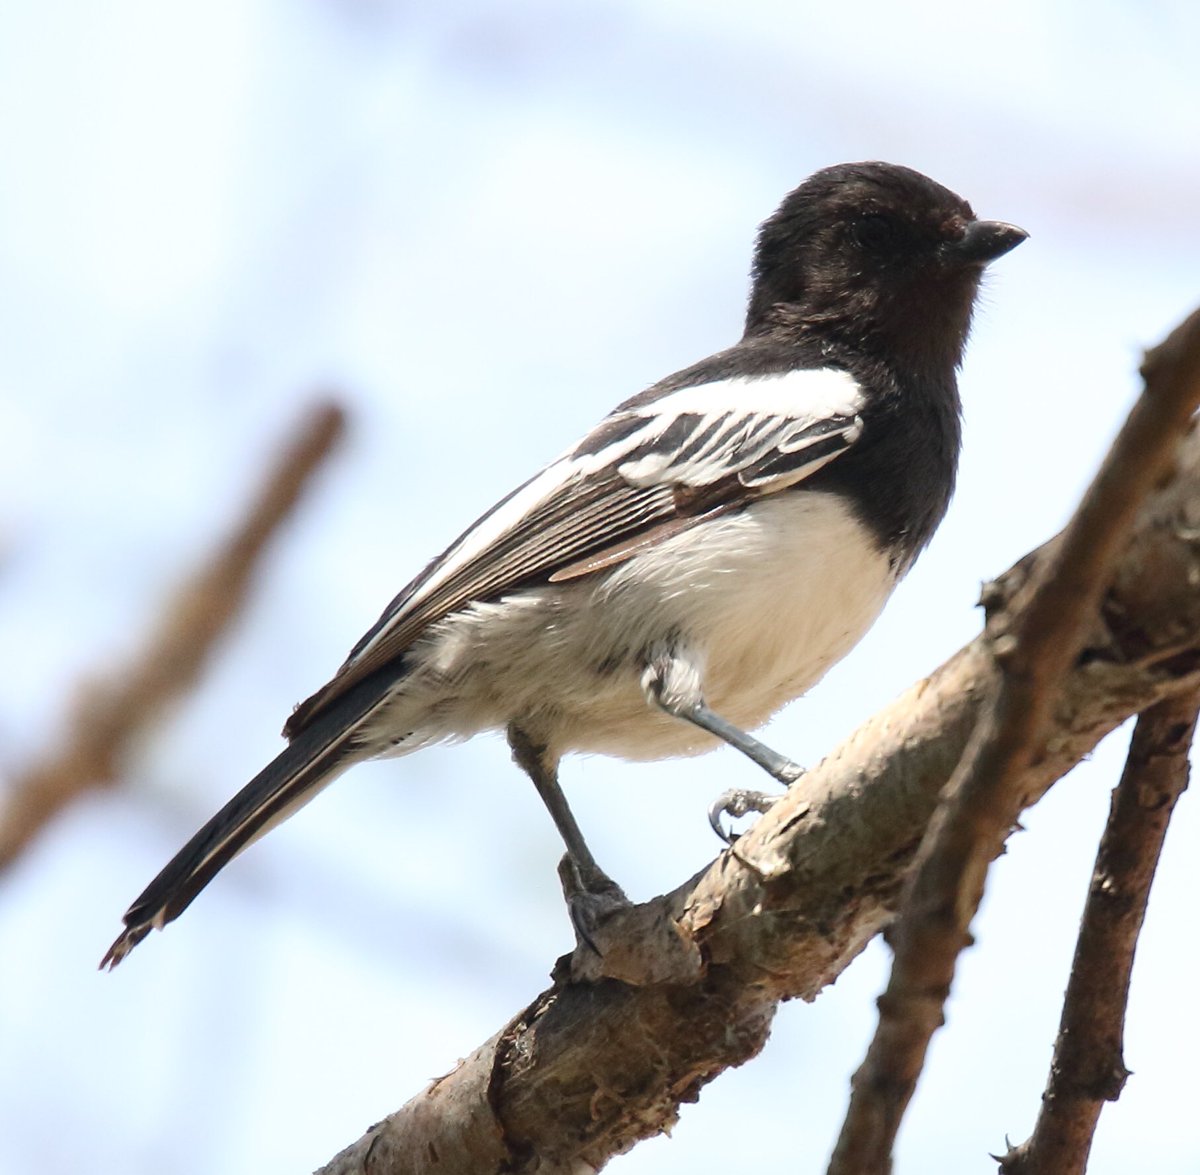 This is a white-bellied tit. You can easily spot these because of their... white bellies.